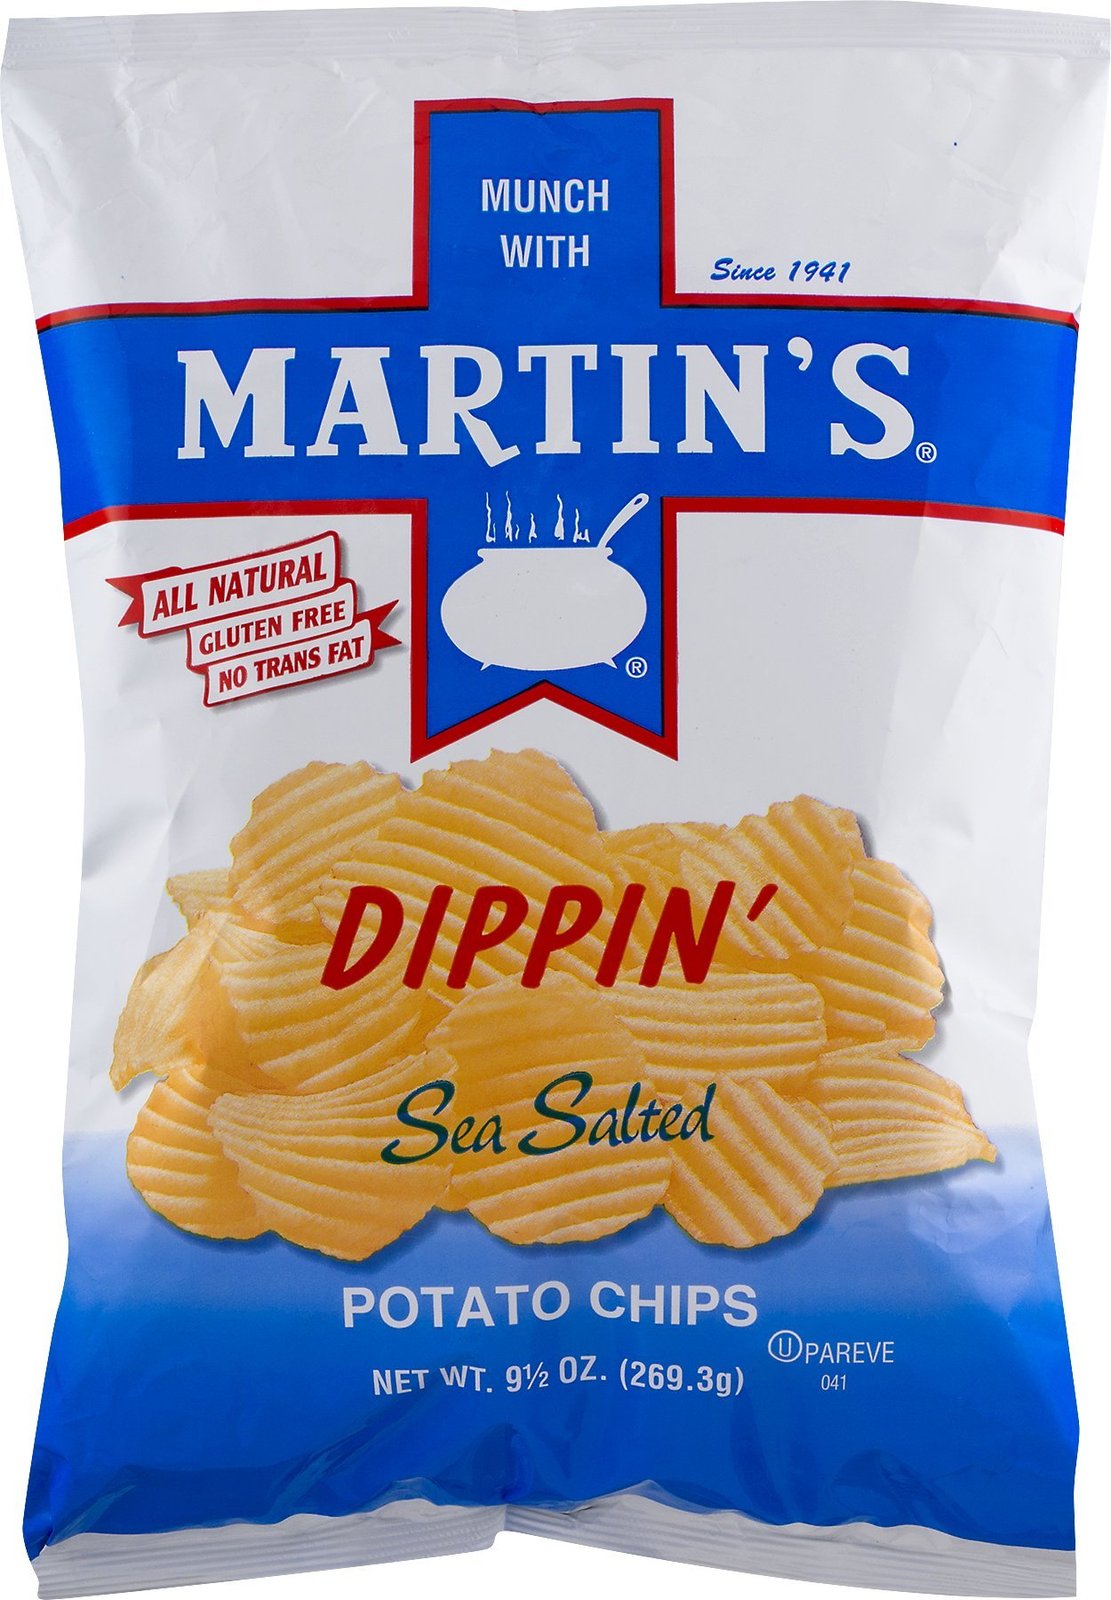 Primary image for Martin's Dippin' Sea Salted Potato Chips 9.5 Ounces (4 Bags)